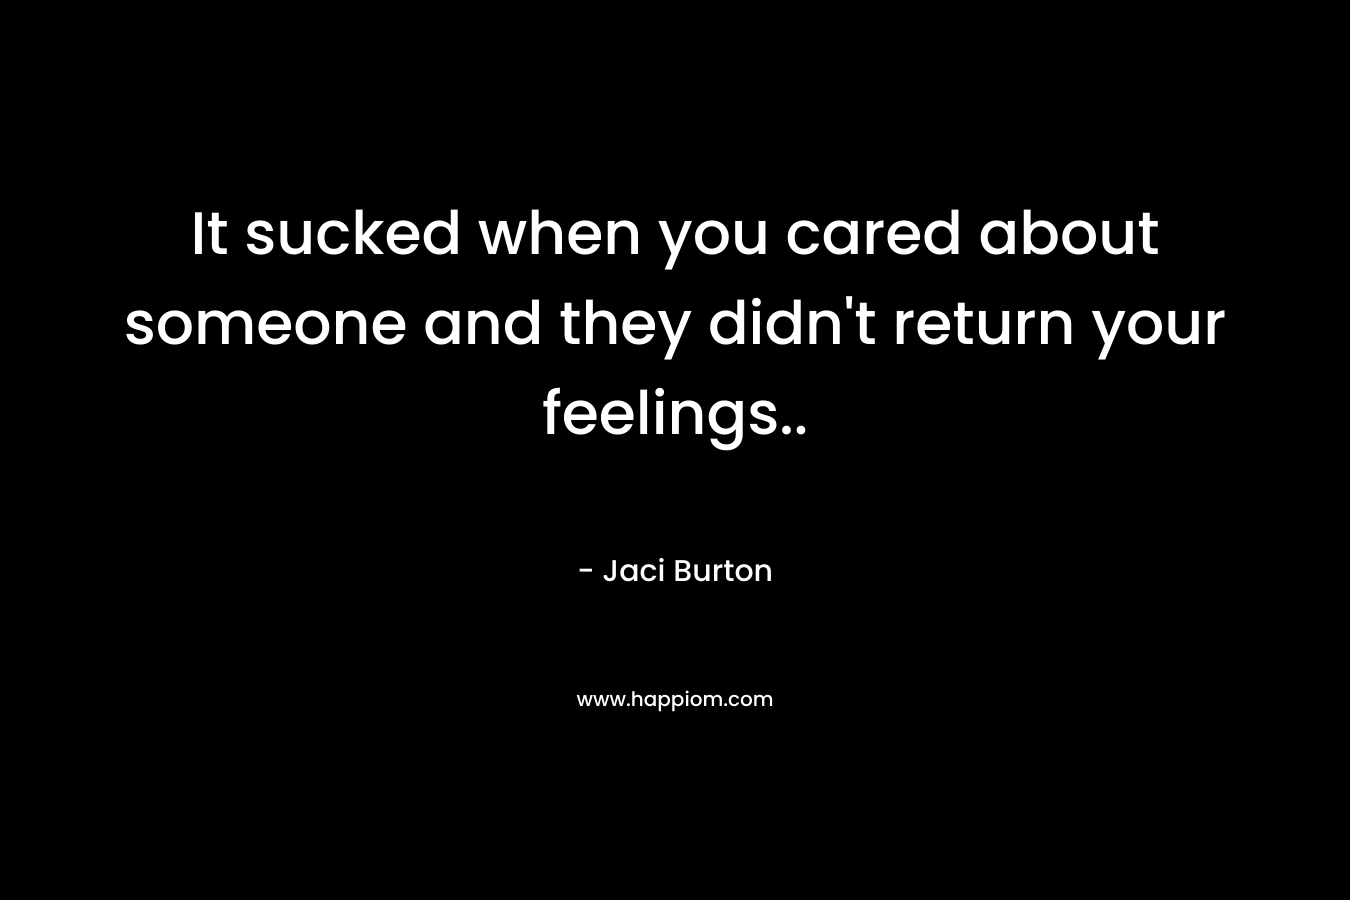 It sucked when you cared about someone and they didn't return your feelings..